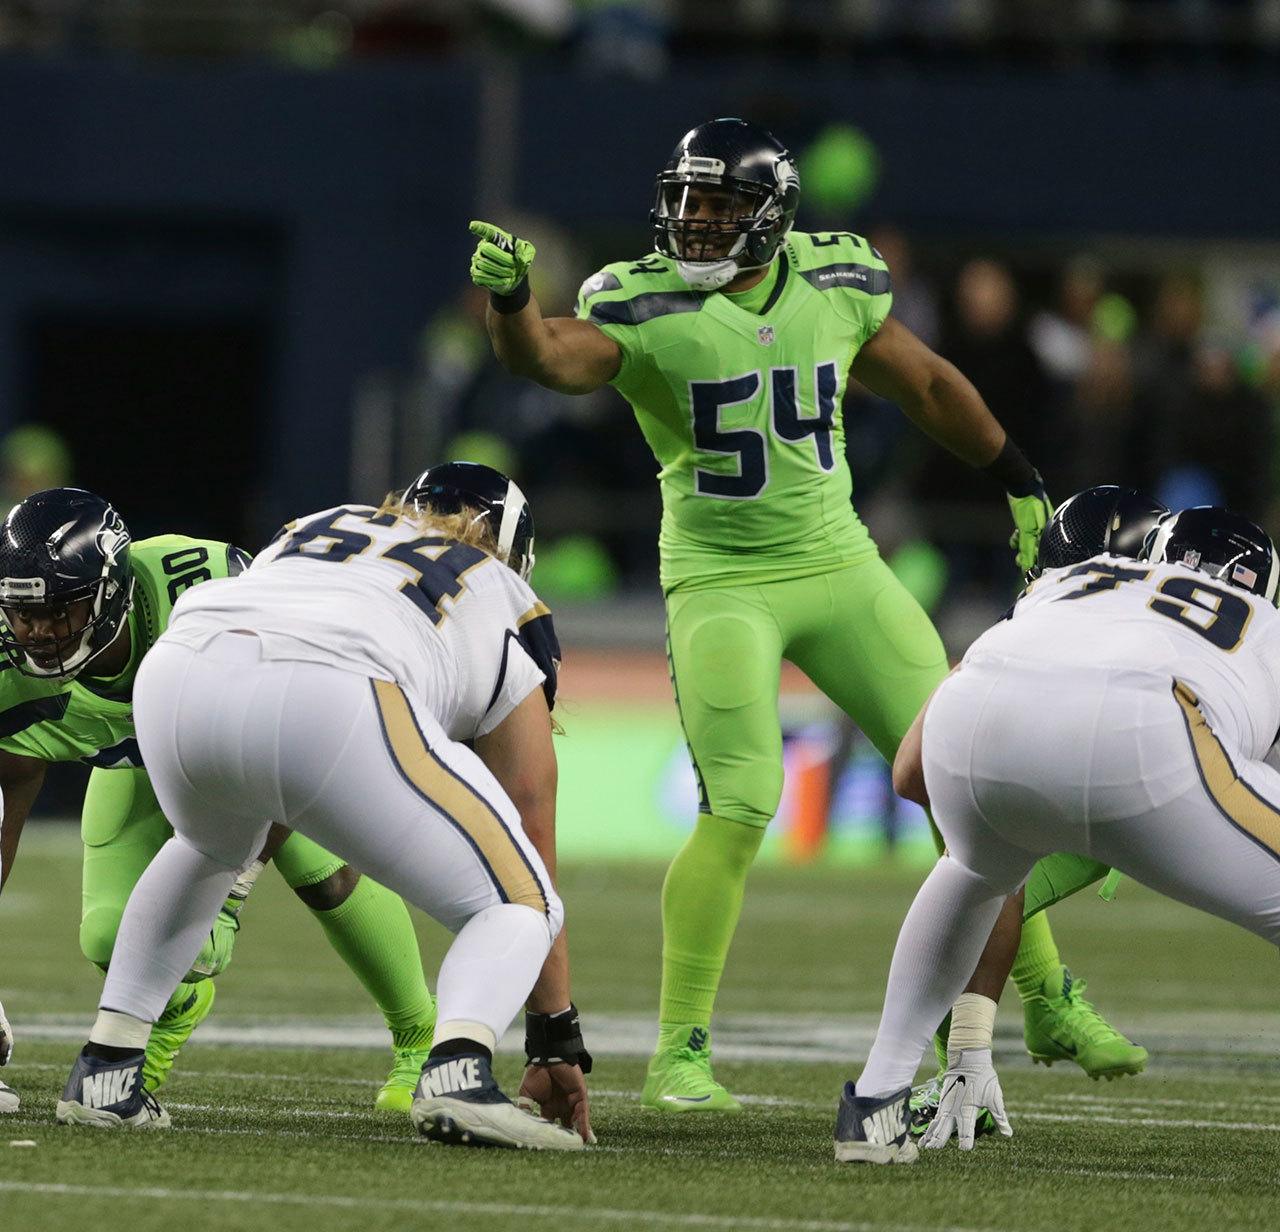 Seahawks middle linebacker Bobby Wagner (54) gestures towards the Rams offense during the second half of a game Dec. 15 in Seattle. (AP Photo/Scott Eklund)